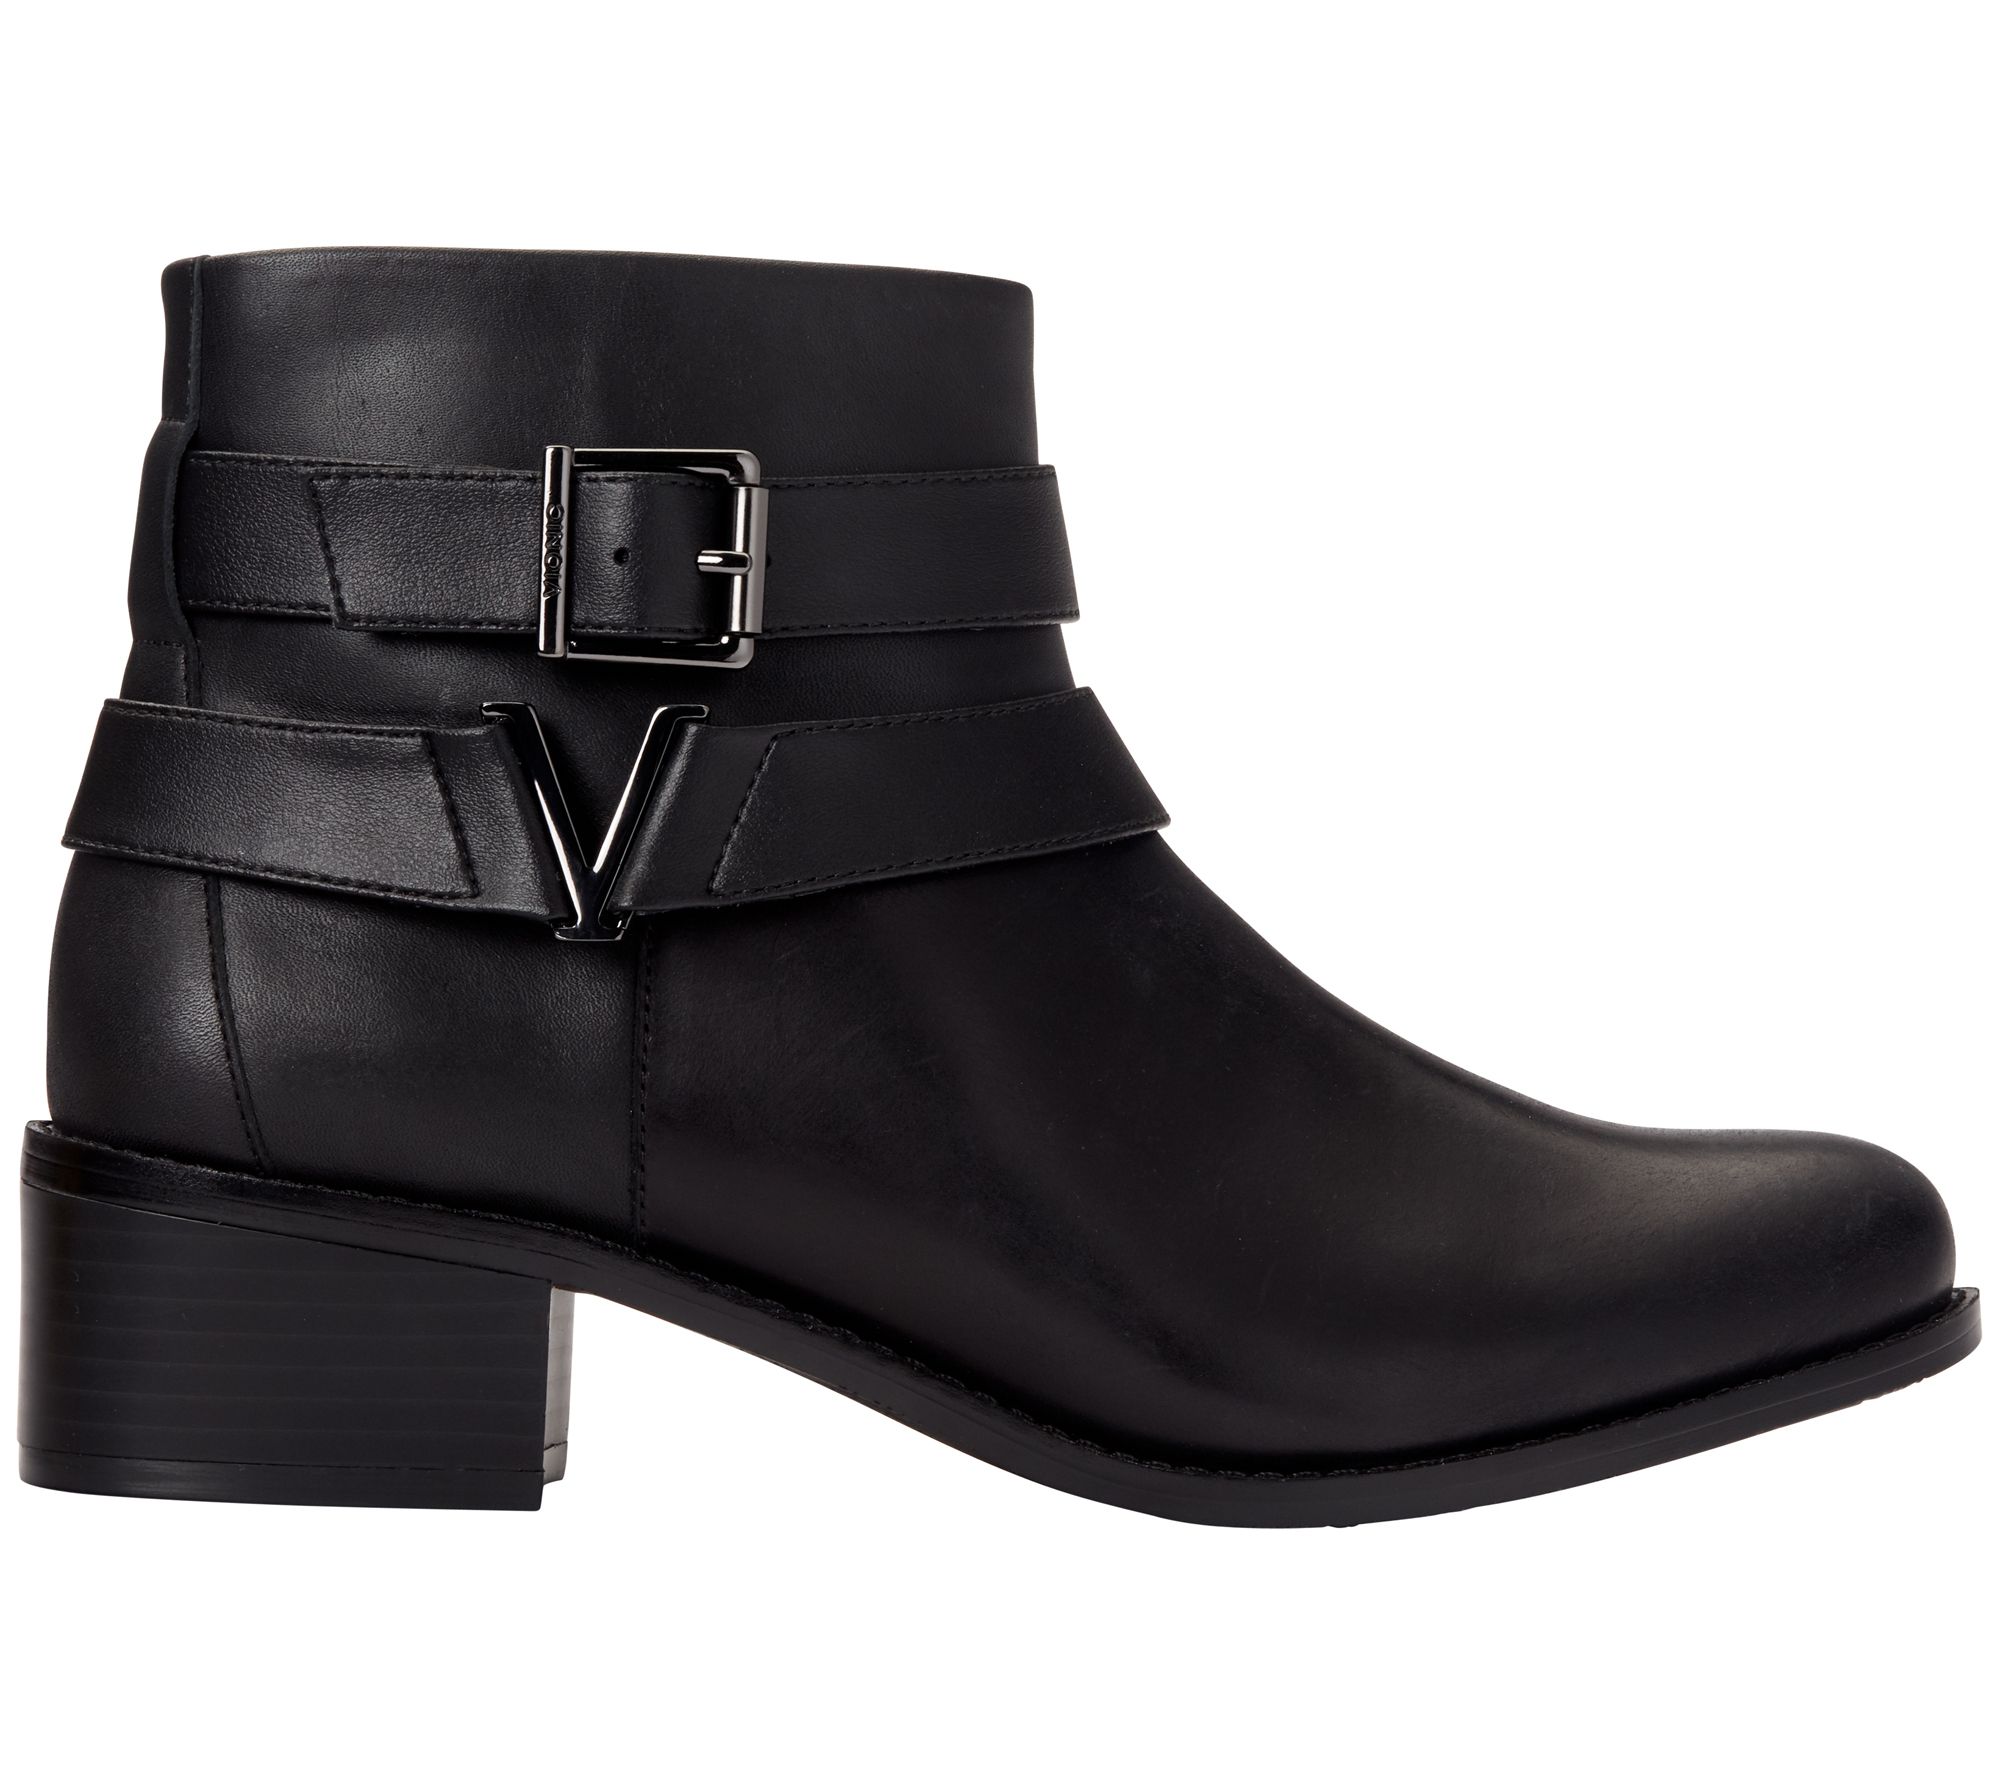 Vionic Leather Stacked-Heel Ankle Boots - Mana - QVC.com